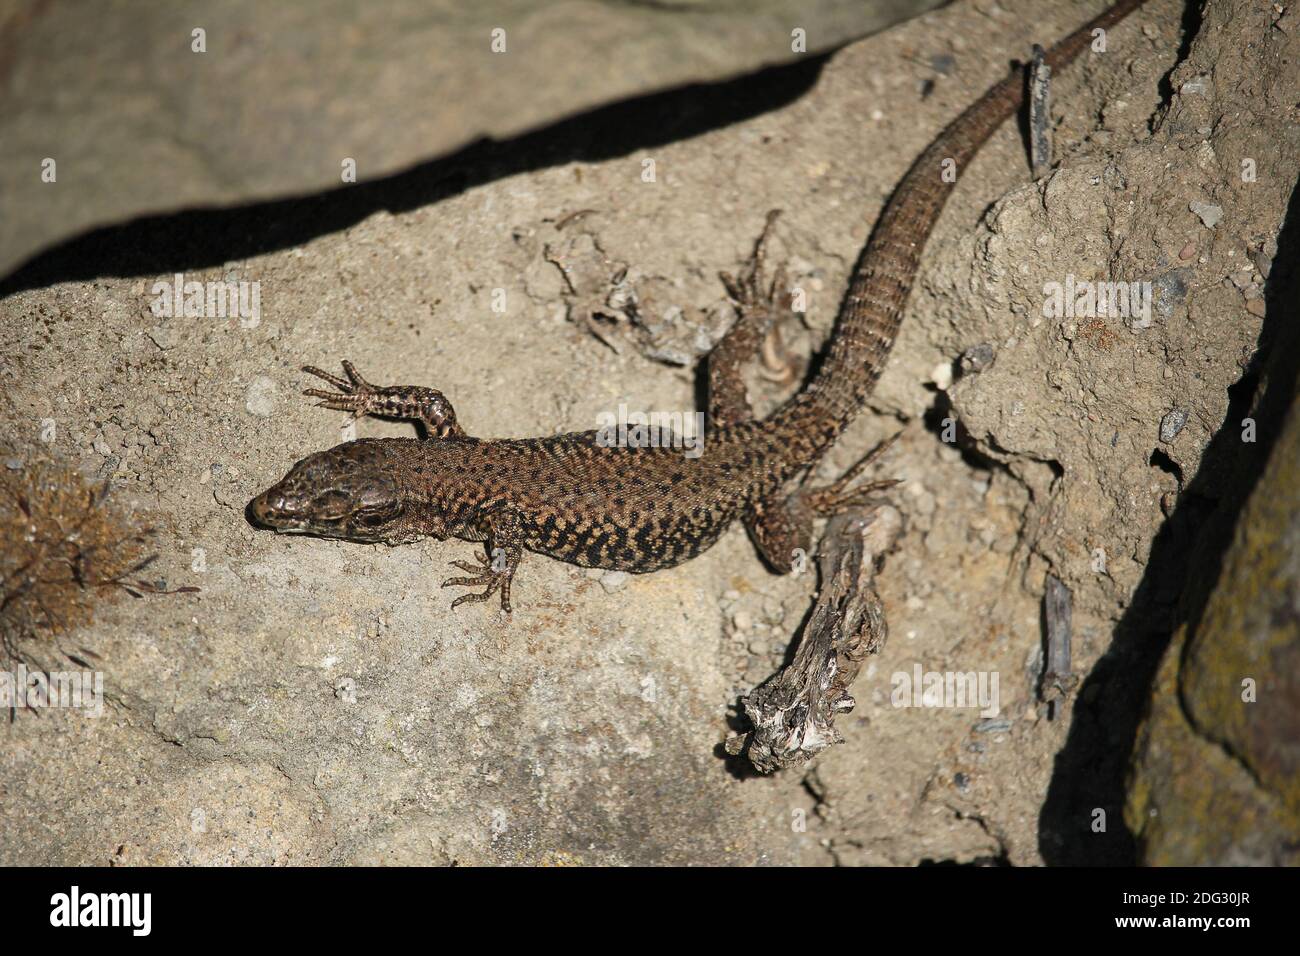 Male Common Wall Lizard (Podarcis muralis) at a stone-wall in the town of Castrop-Rauxel, Germany Stock Photo